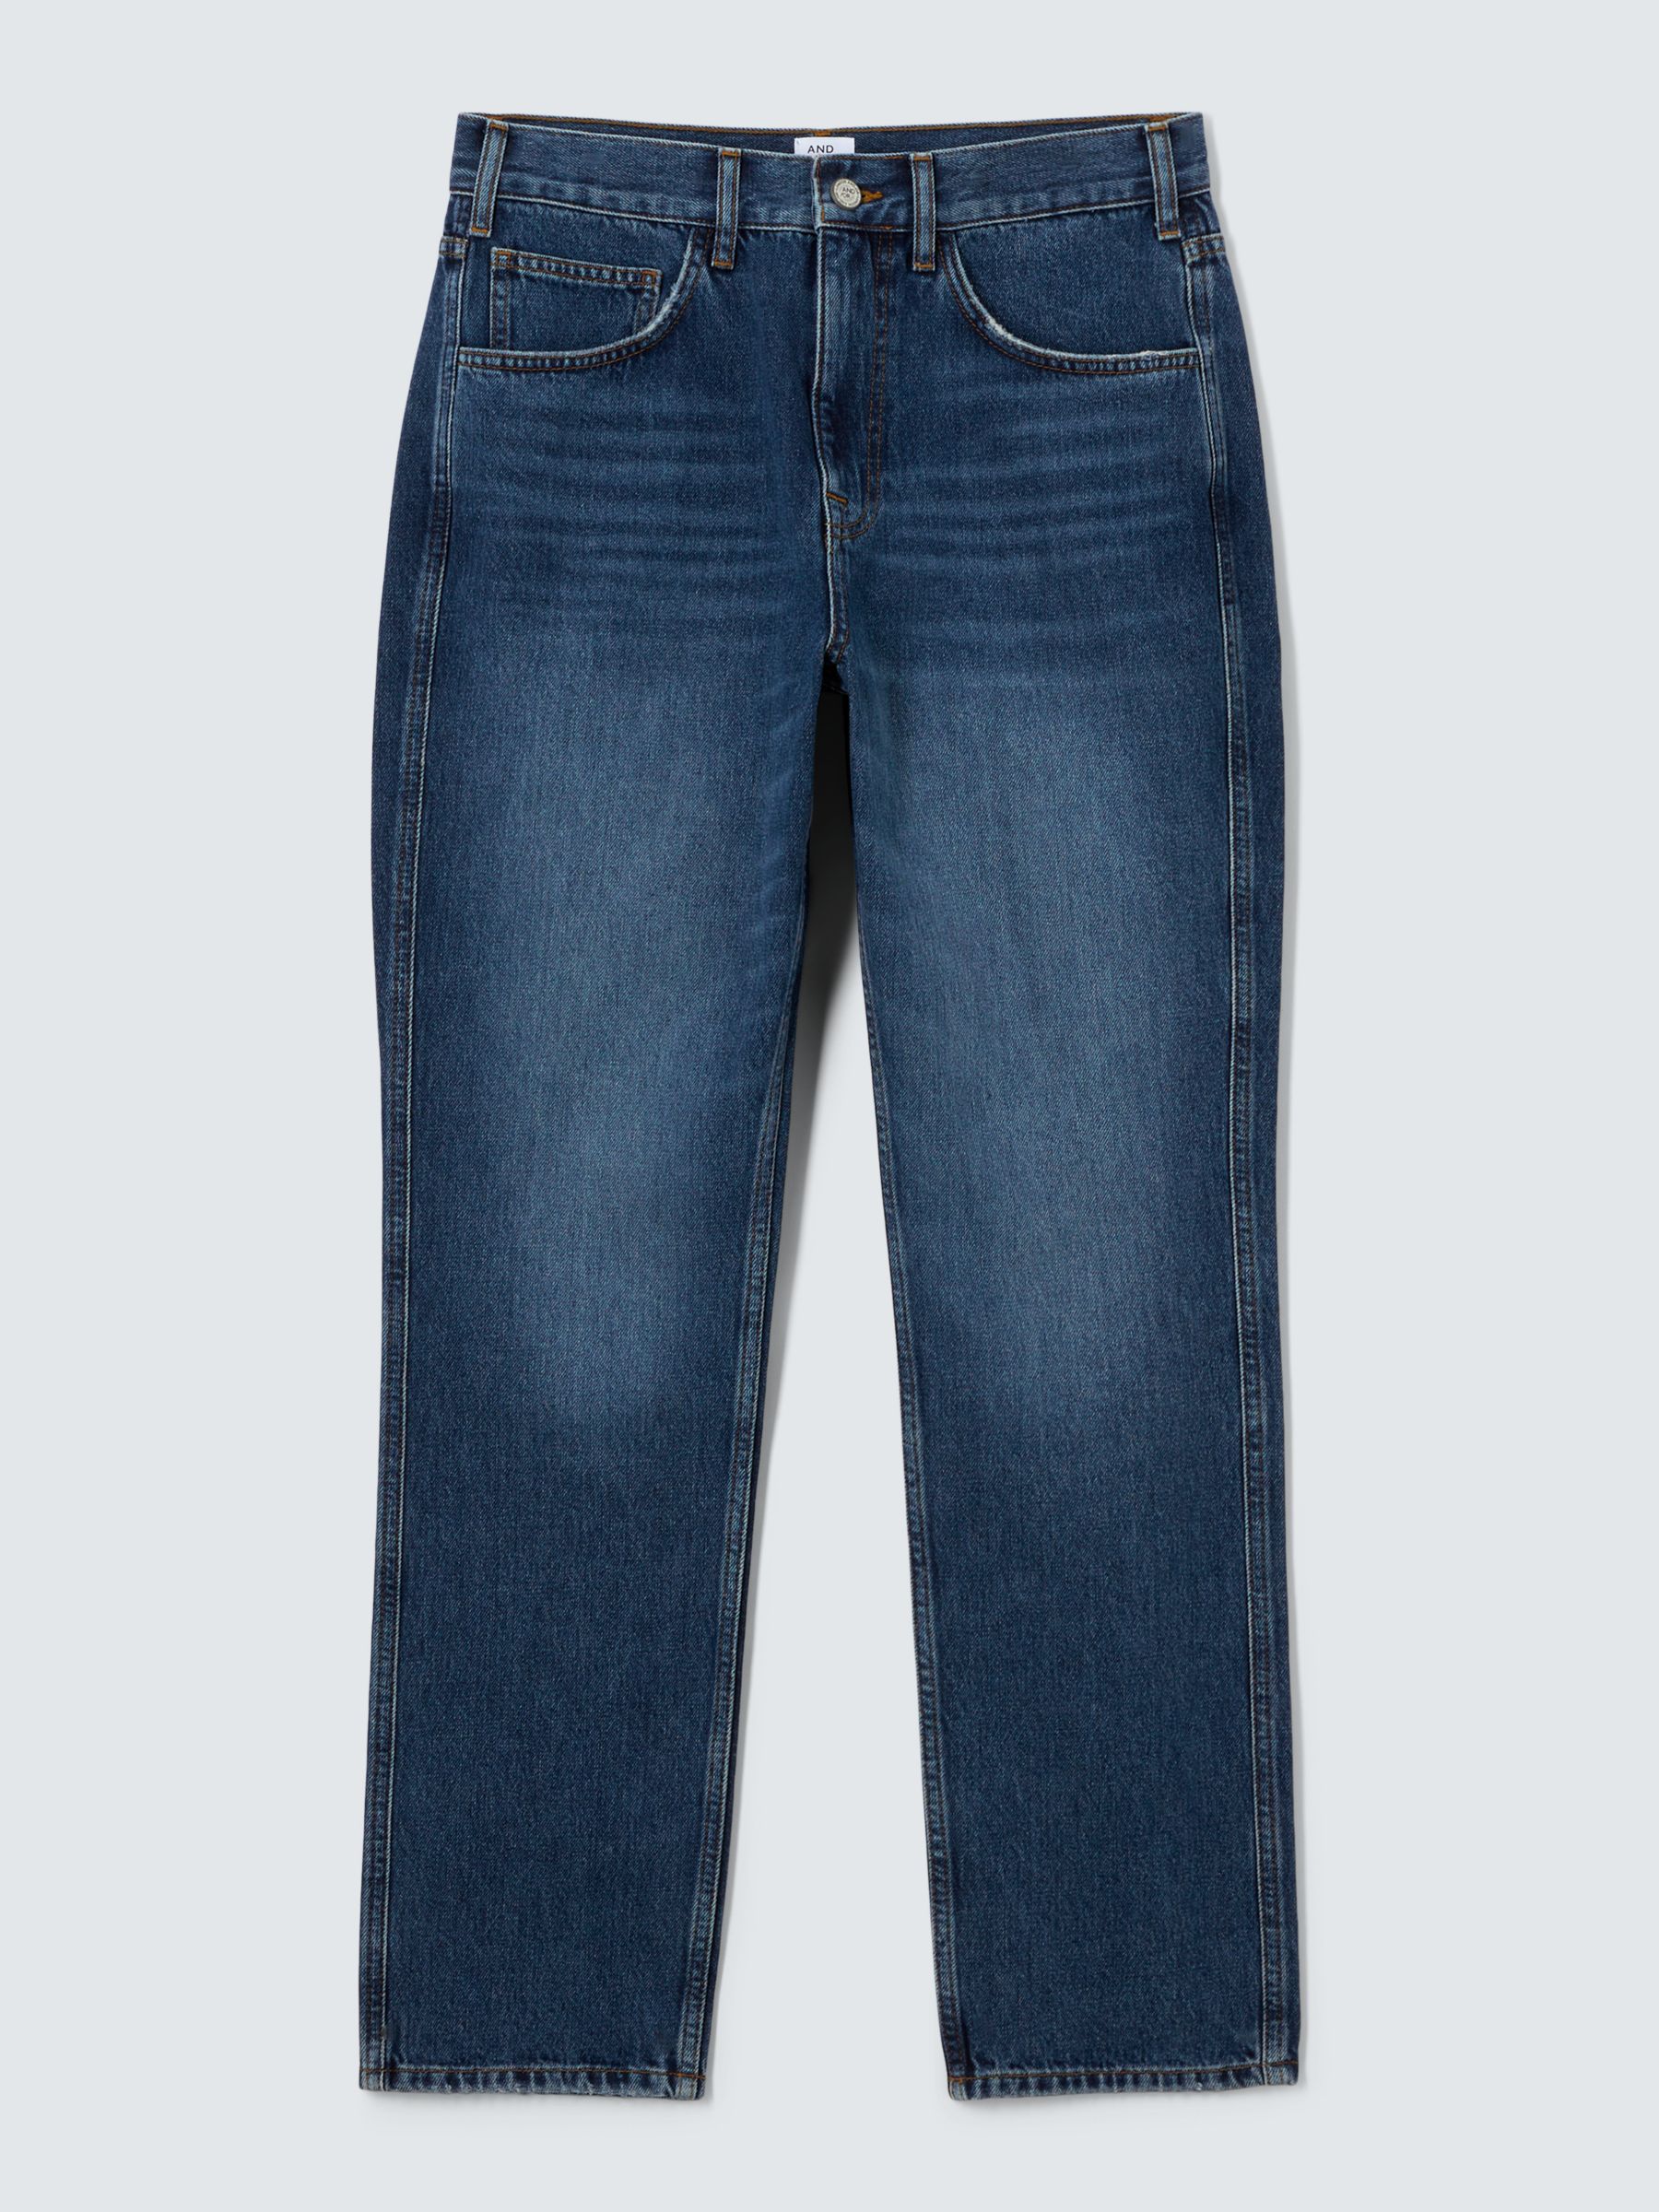 AND/OR Melrose Straight Cut Jeans, Dark Blue Wash, 34R